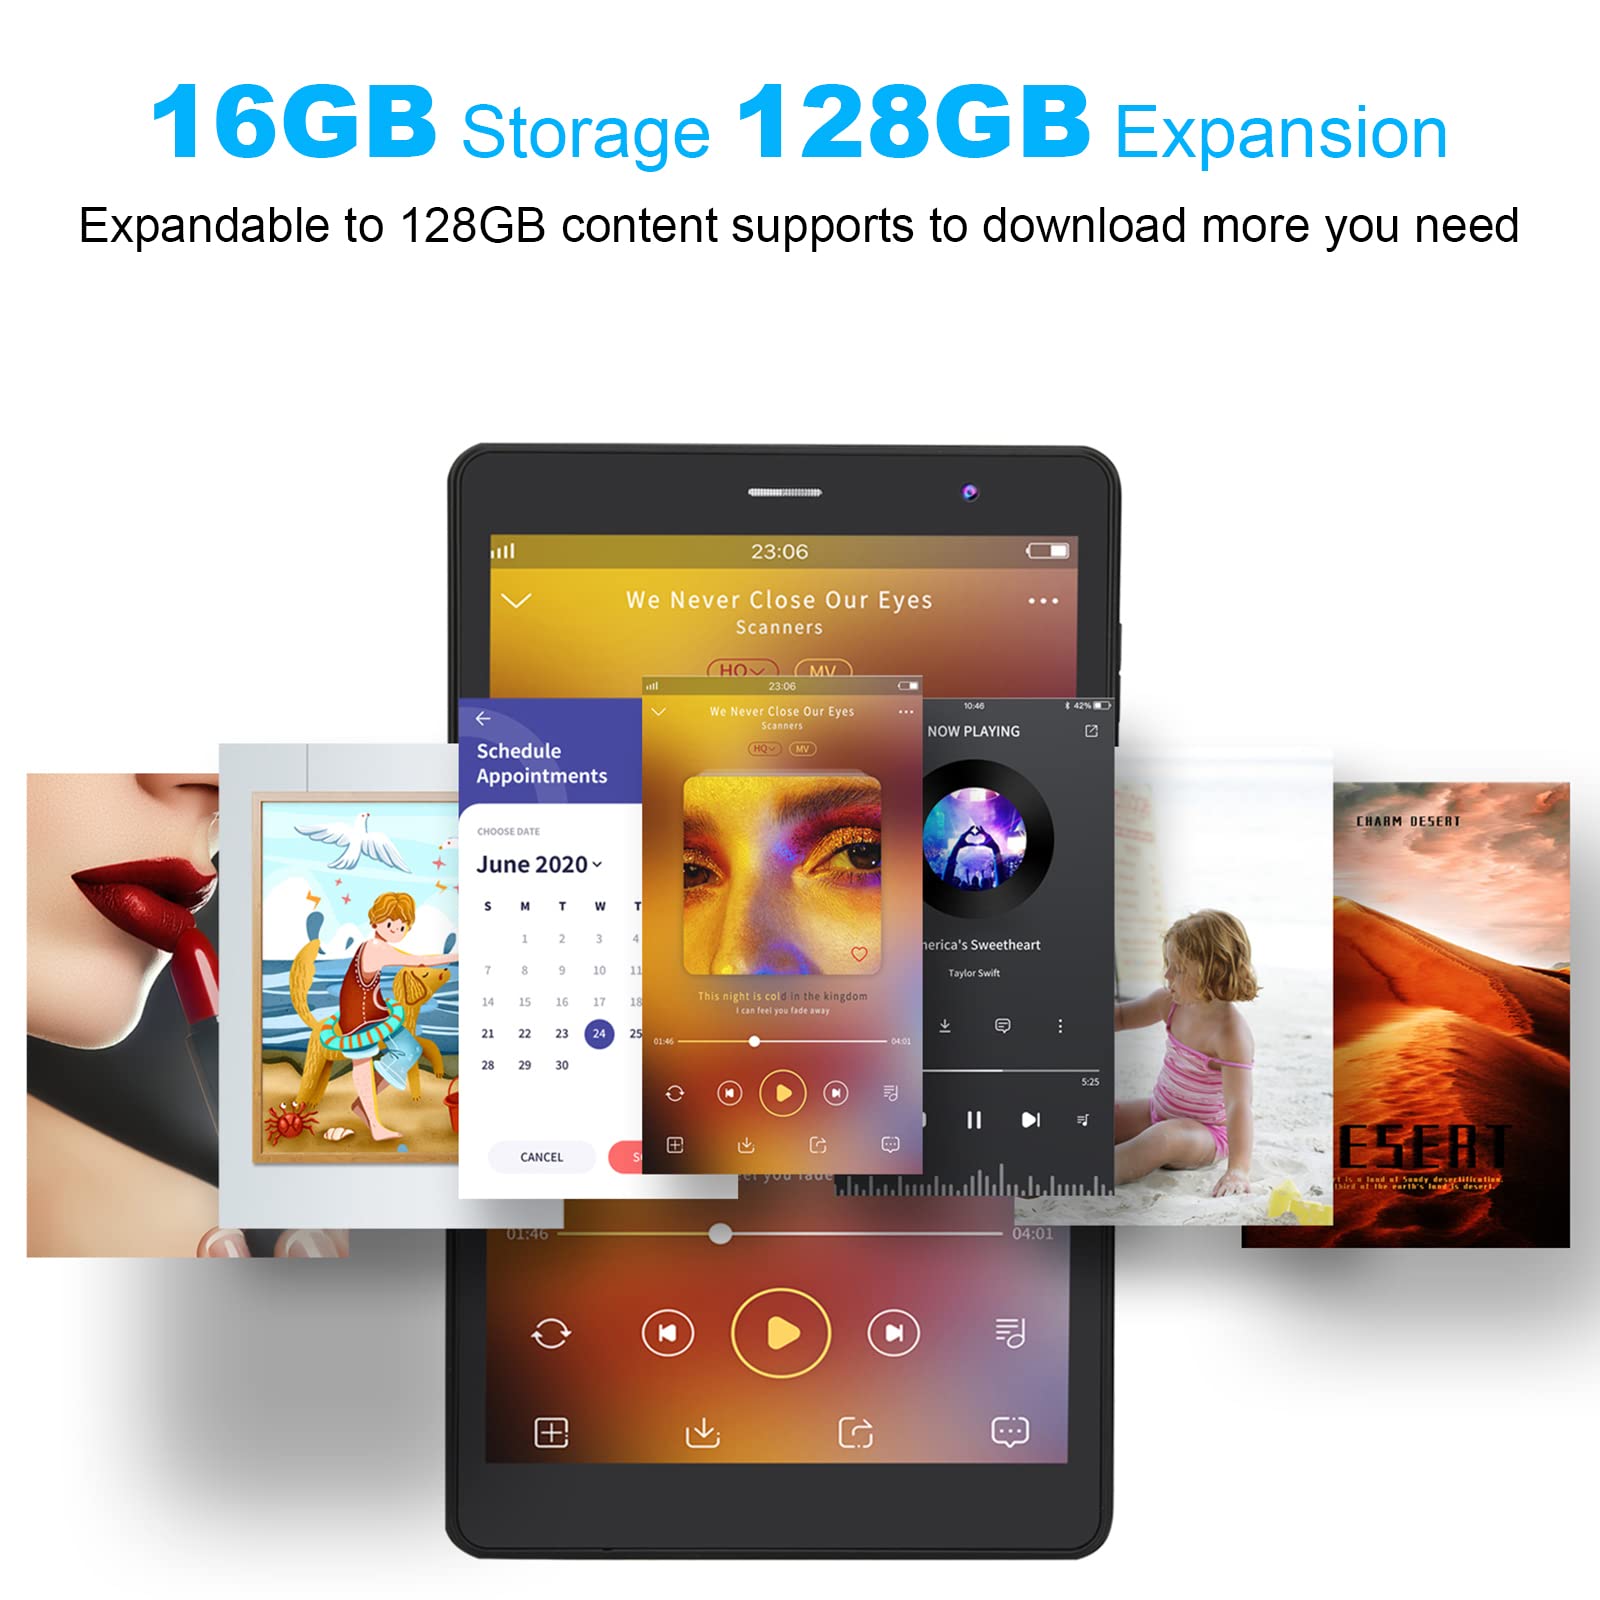 SZTPSLS Android Tablet 8 inch, Android 11.0 16GB Storage 128GB TF Expansion Tablets, Quad-core A7 Processor 800x1280 IPS HD Touchscreen Dual Camera Tablets, Support WiFi, Bluetooth